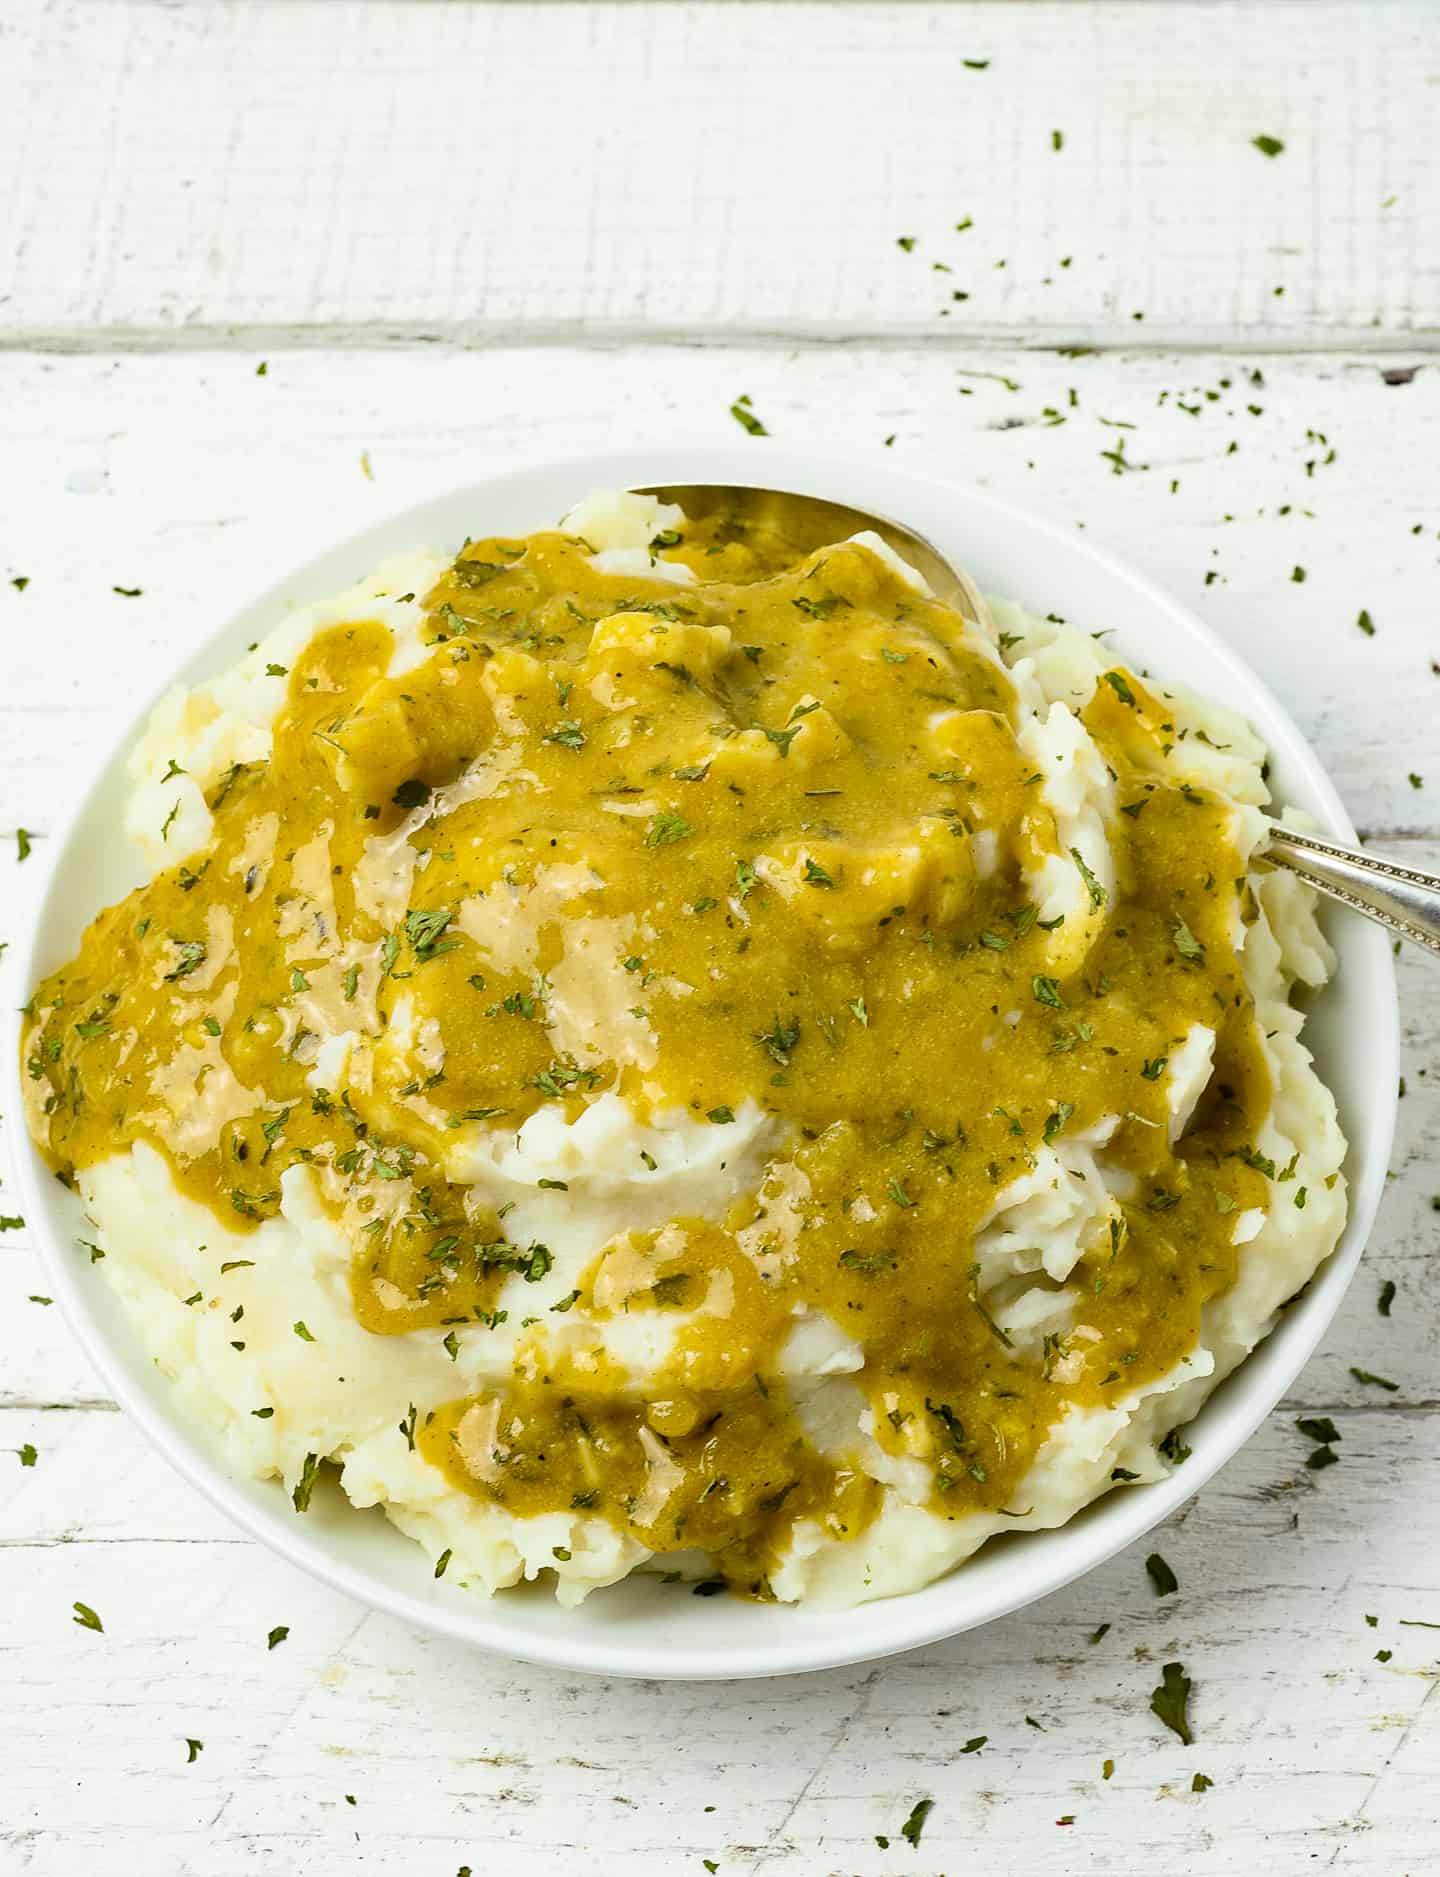 Bowl of mashed potatoes and gravy.